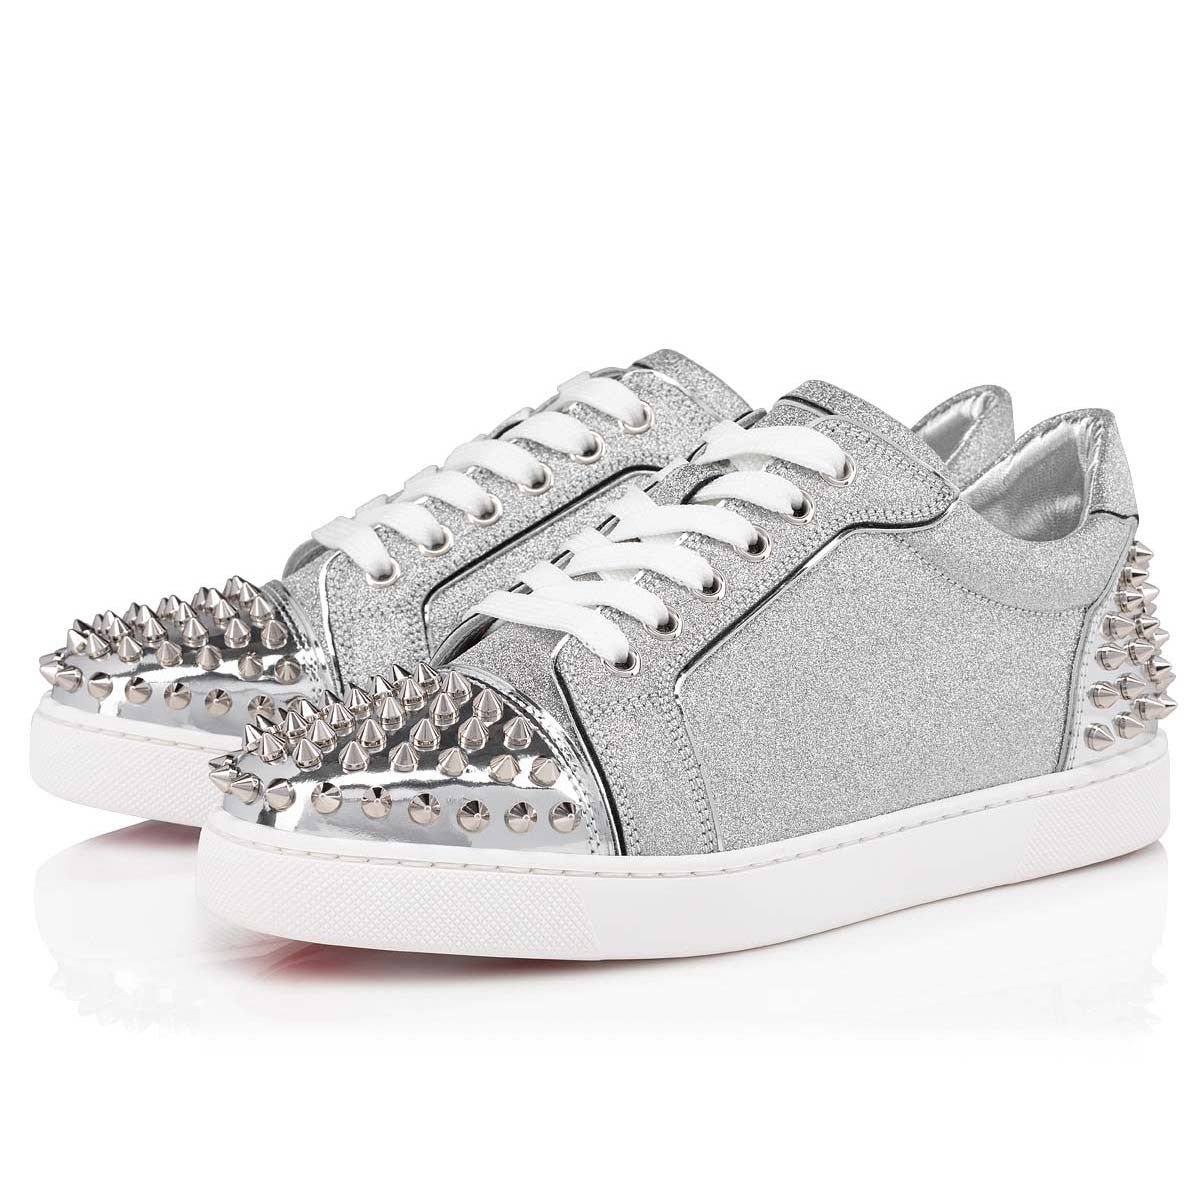 Vieira 2 Glittered Calf Leather and Spikes Silver Low-top Sneakers